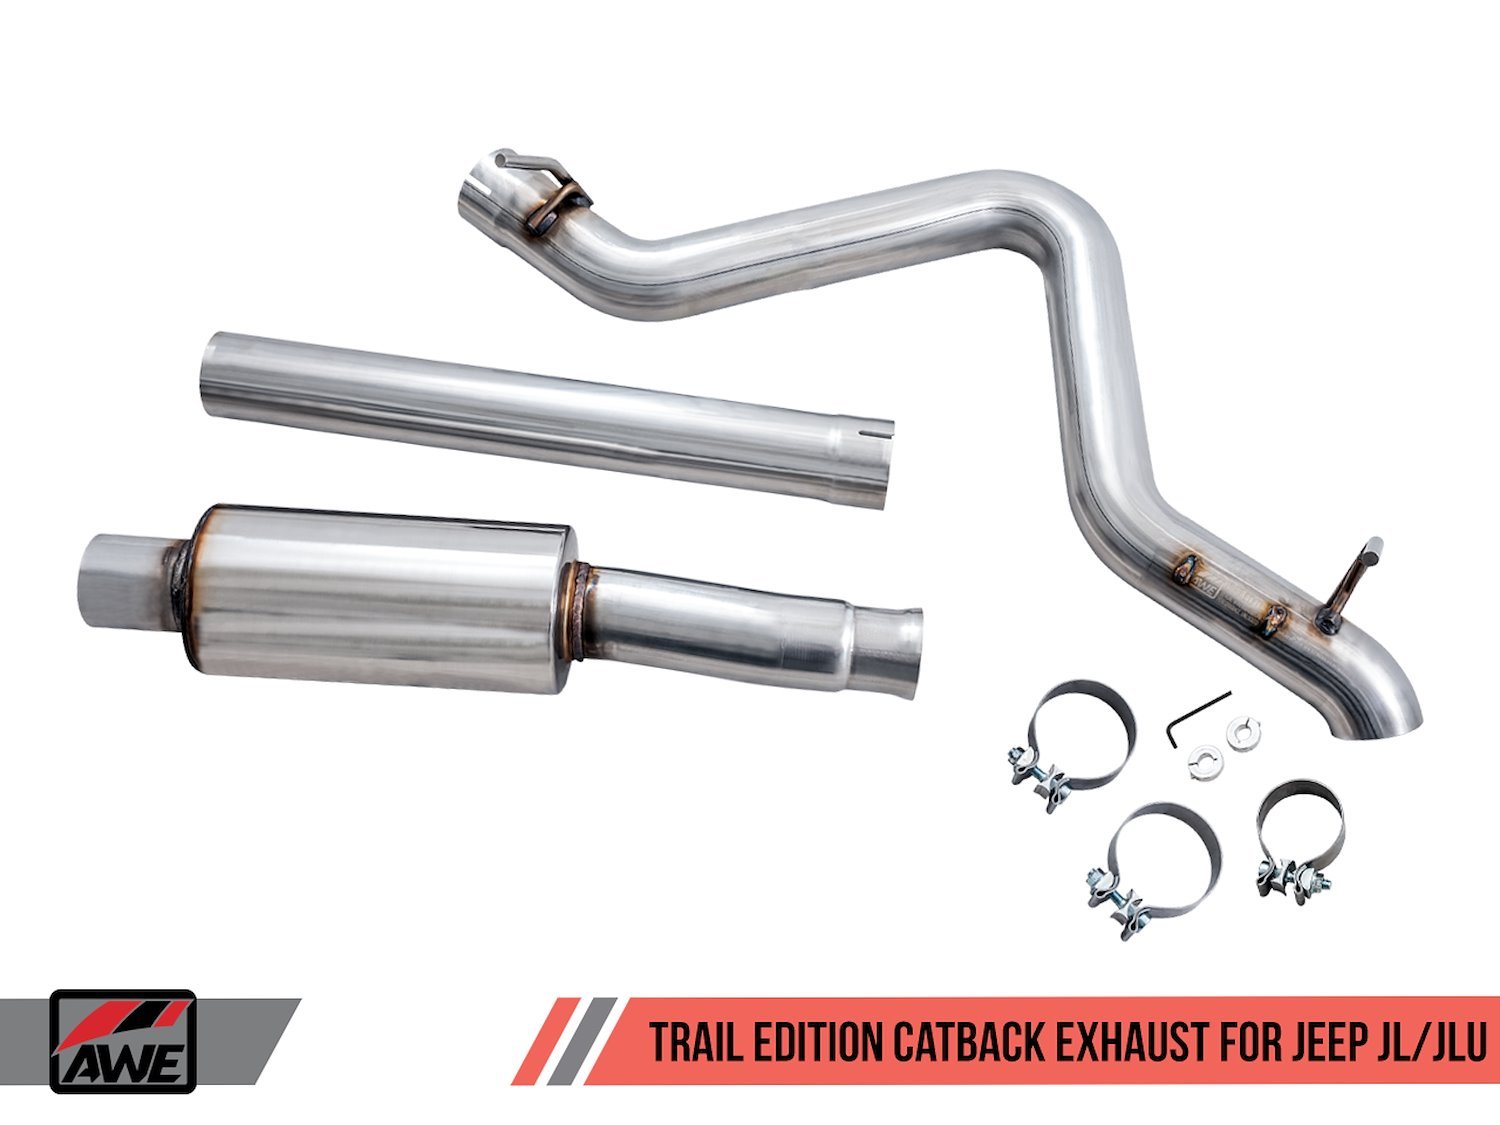 Trail Edition Cat-back Exhaust for Jeep JT 3.6L